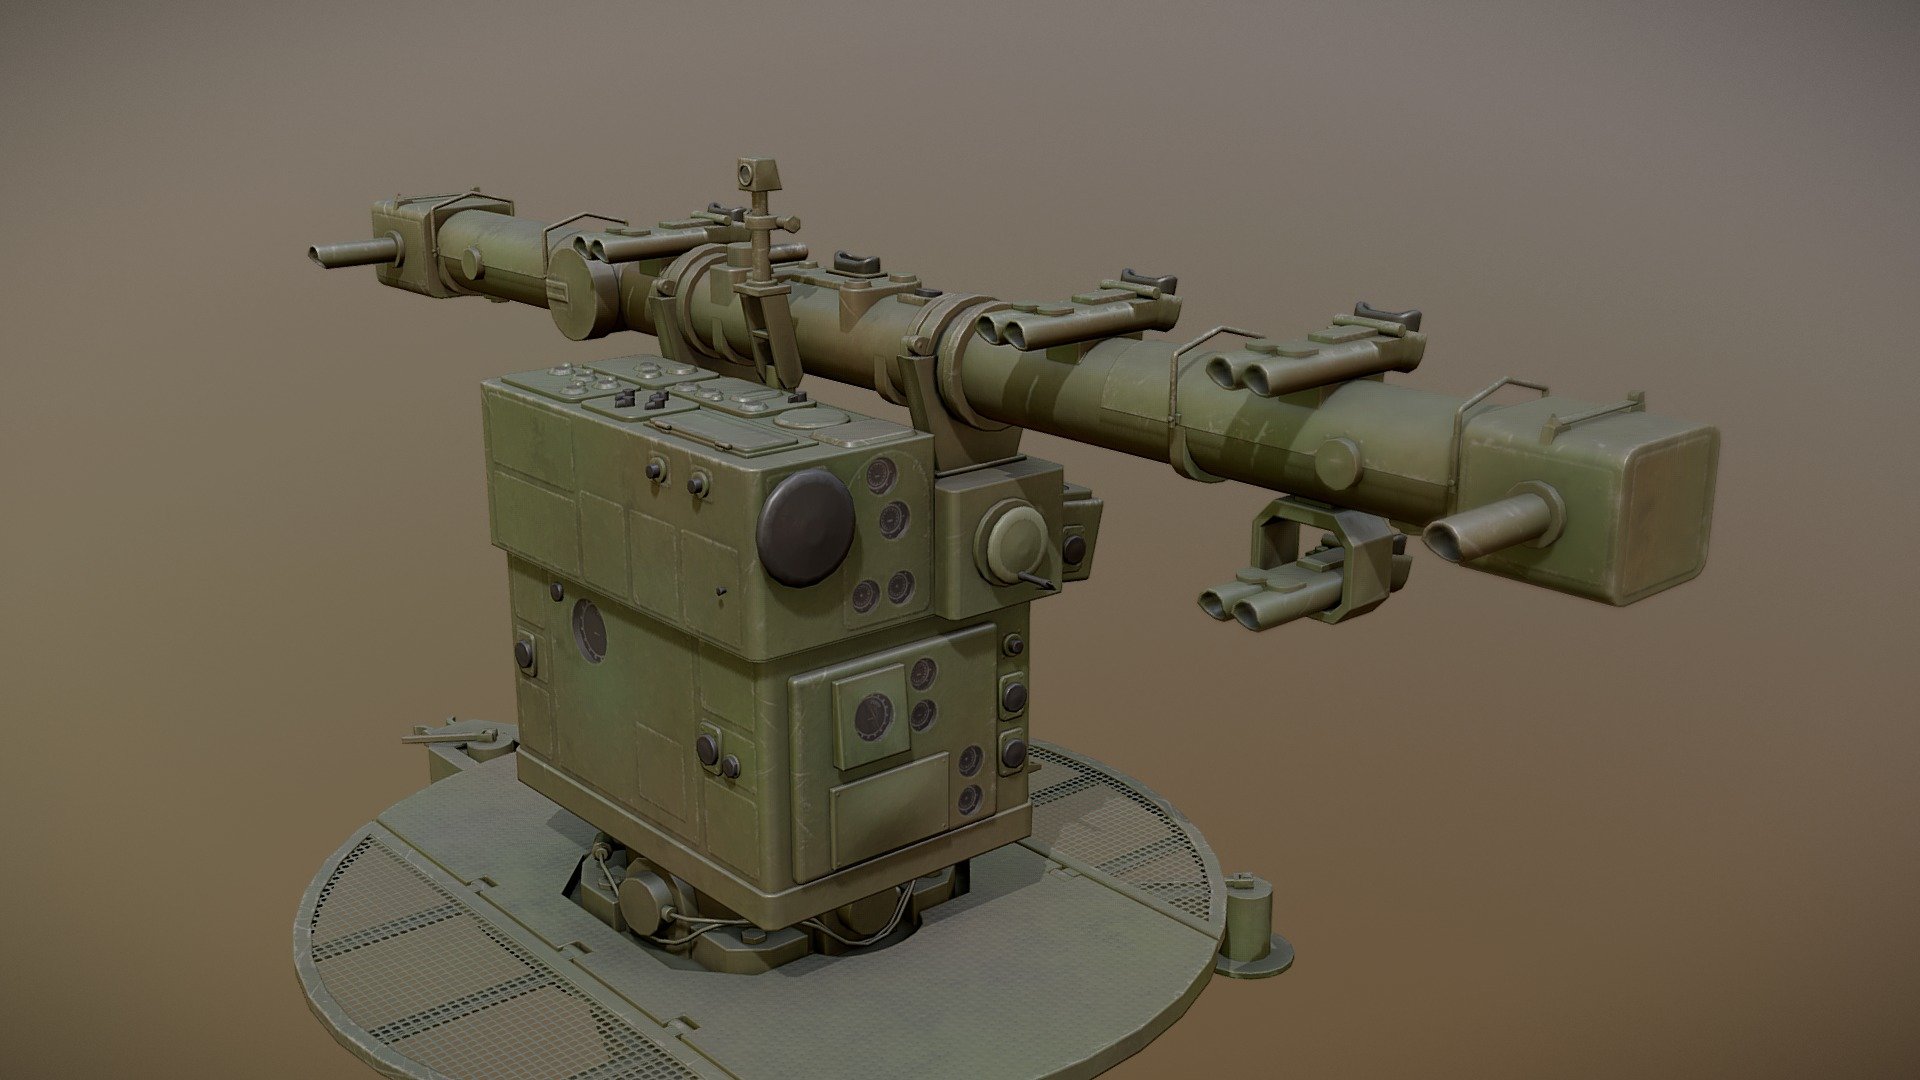 The Kommando-Gerät 40 is an anti-aircraft fire director used principally for major caliber weapons such as the 8.8 cm FlaK 36 and 10.5 cm FlaK 40. However, by installing the proper ballistic cams, it may be used with any type of gun 3d model